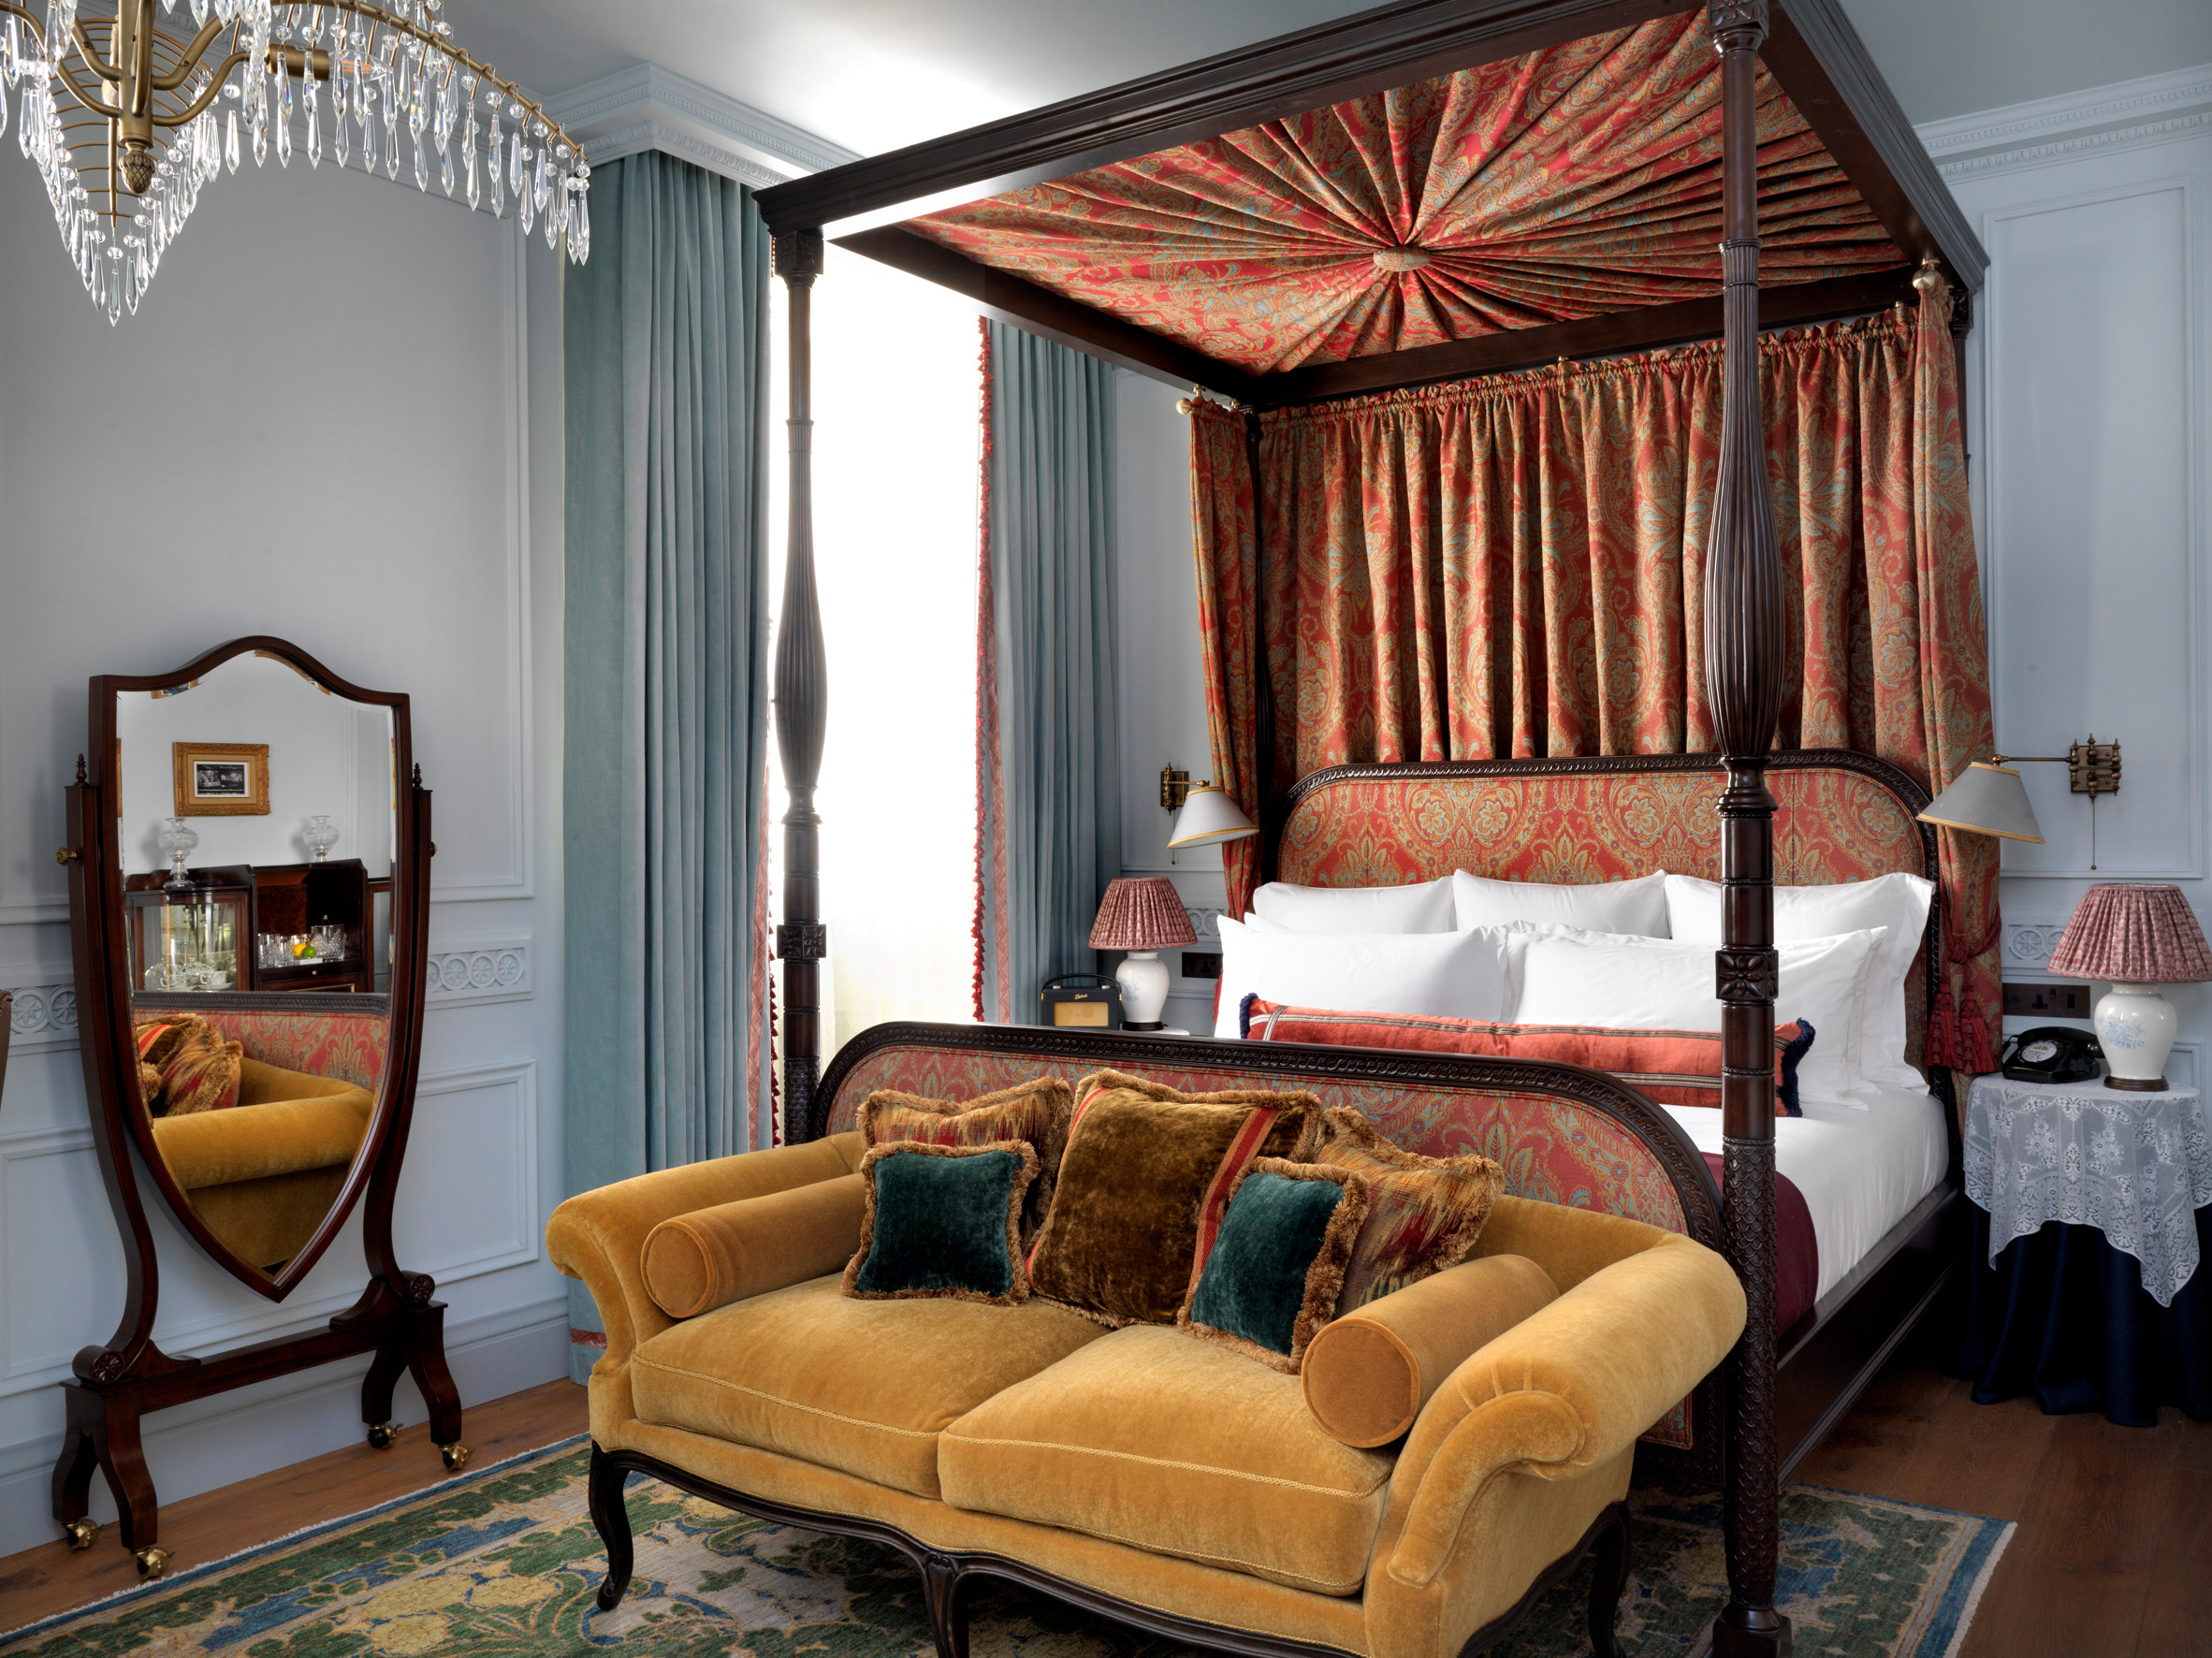 A hotel bedroom designed by Soho House